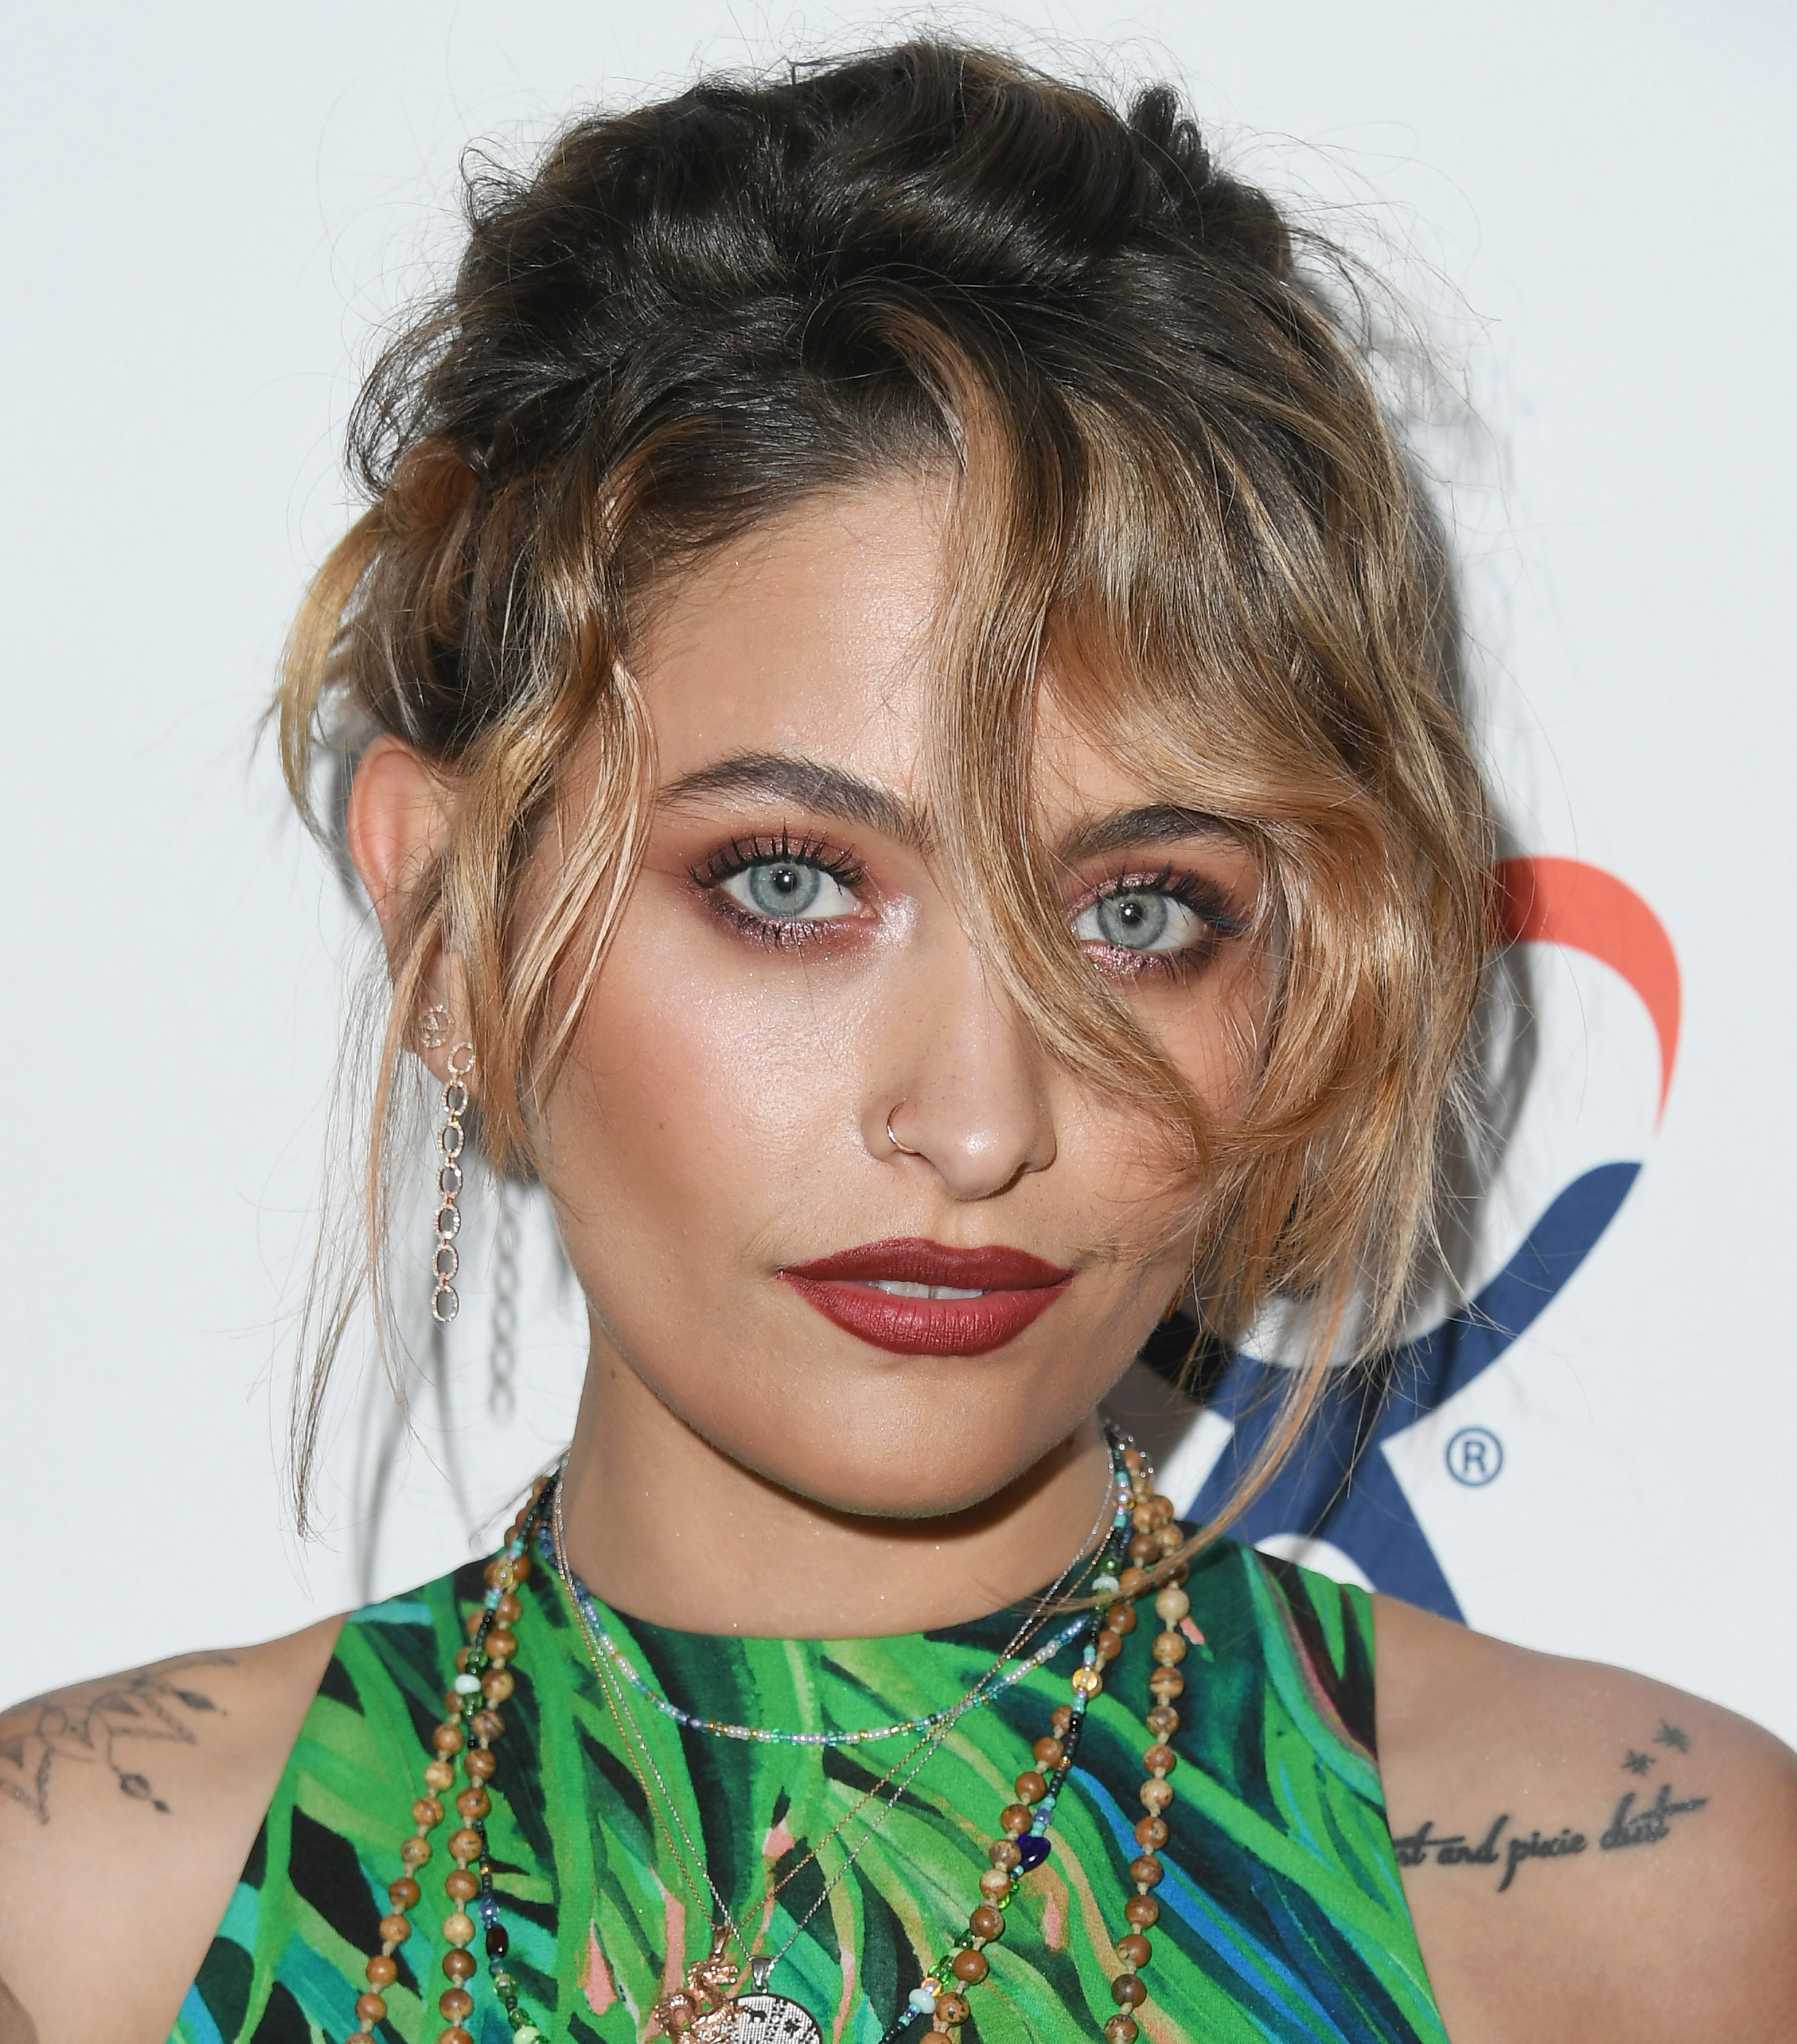 Paris Jackson attends a gala in Beverly Hills, California on April 18, 2018 | Source: Getty Images